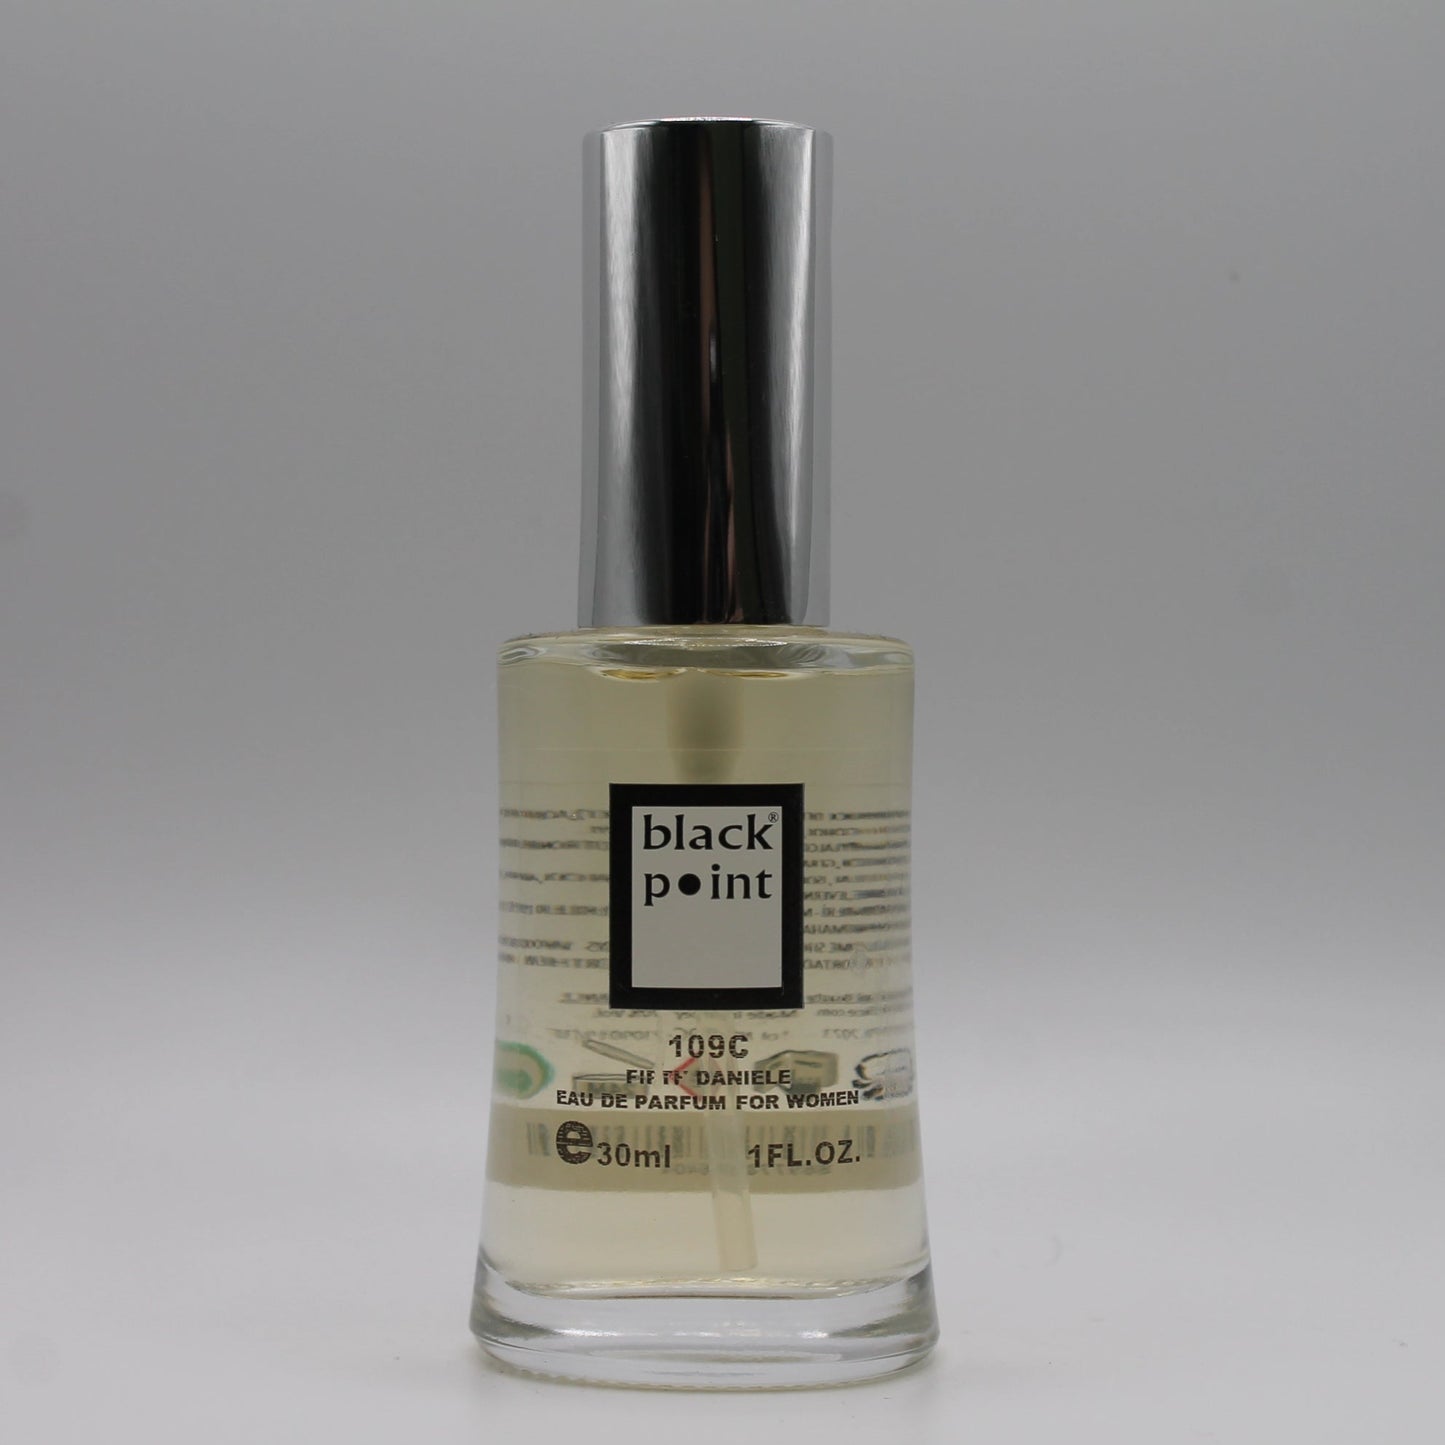 Fifth Danielle Fragrance For Her - C109